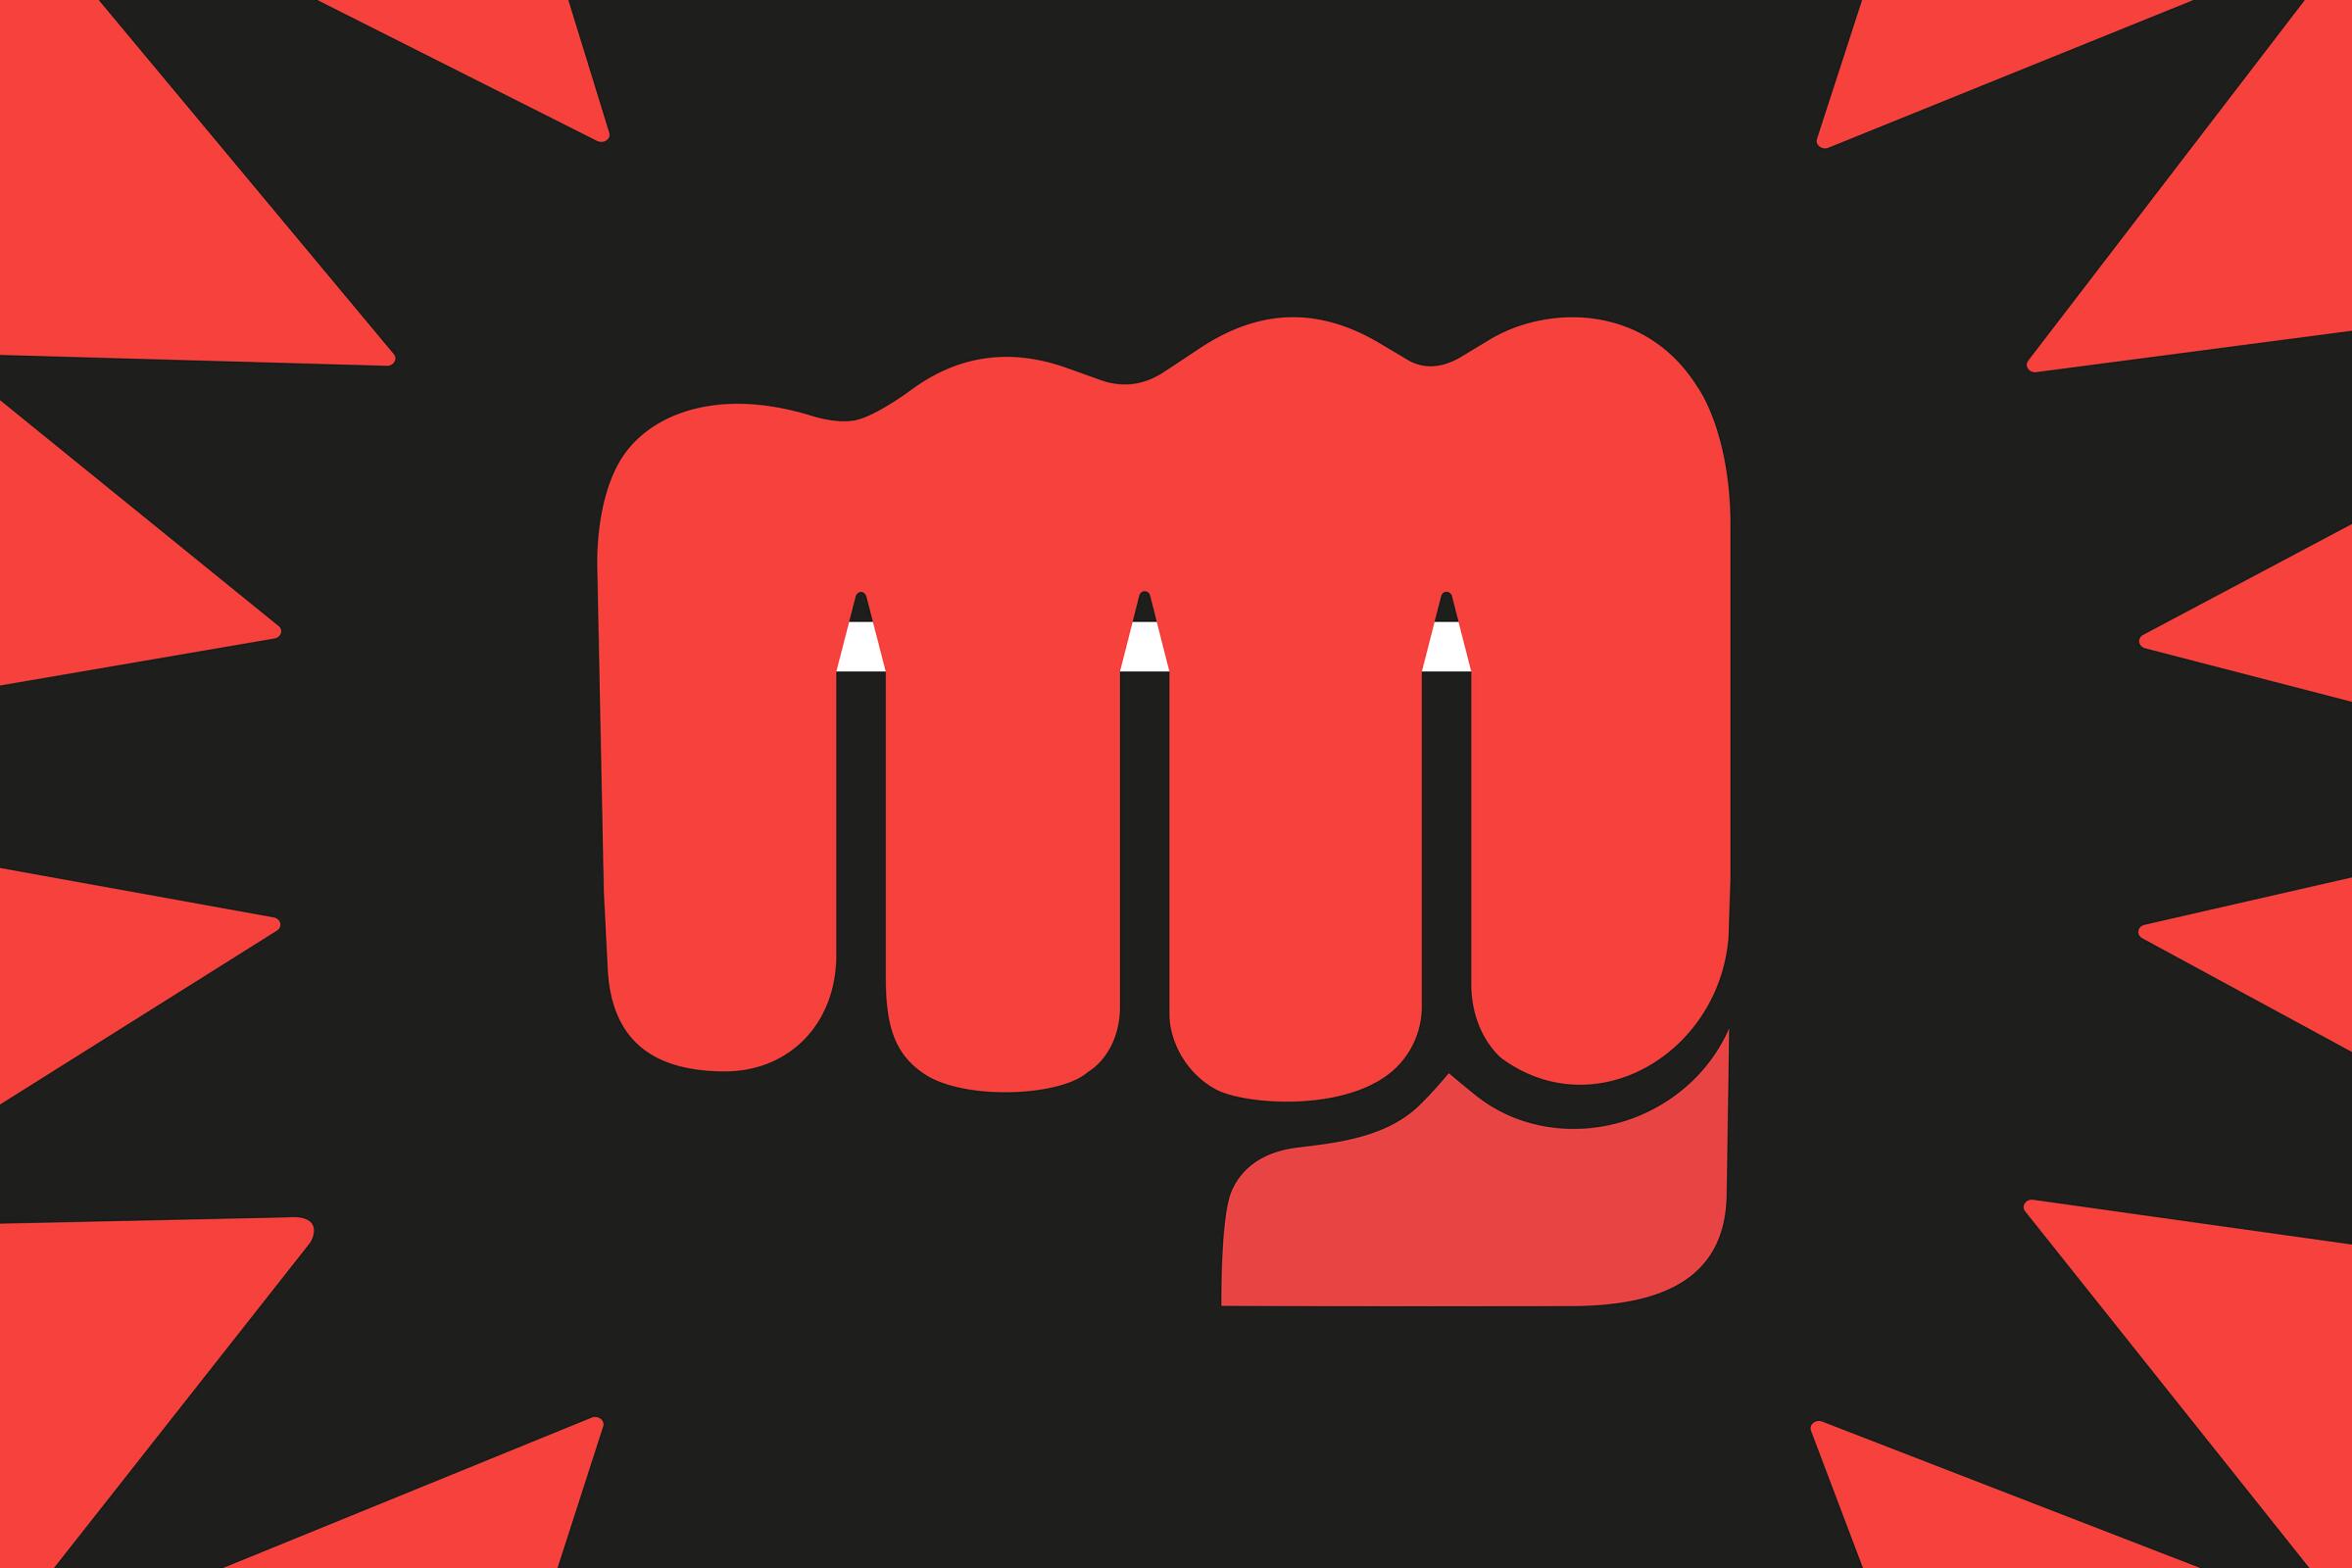 Illustration of a fist on a starburst background with pencils in the negative space.